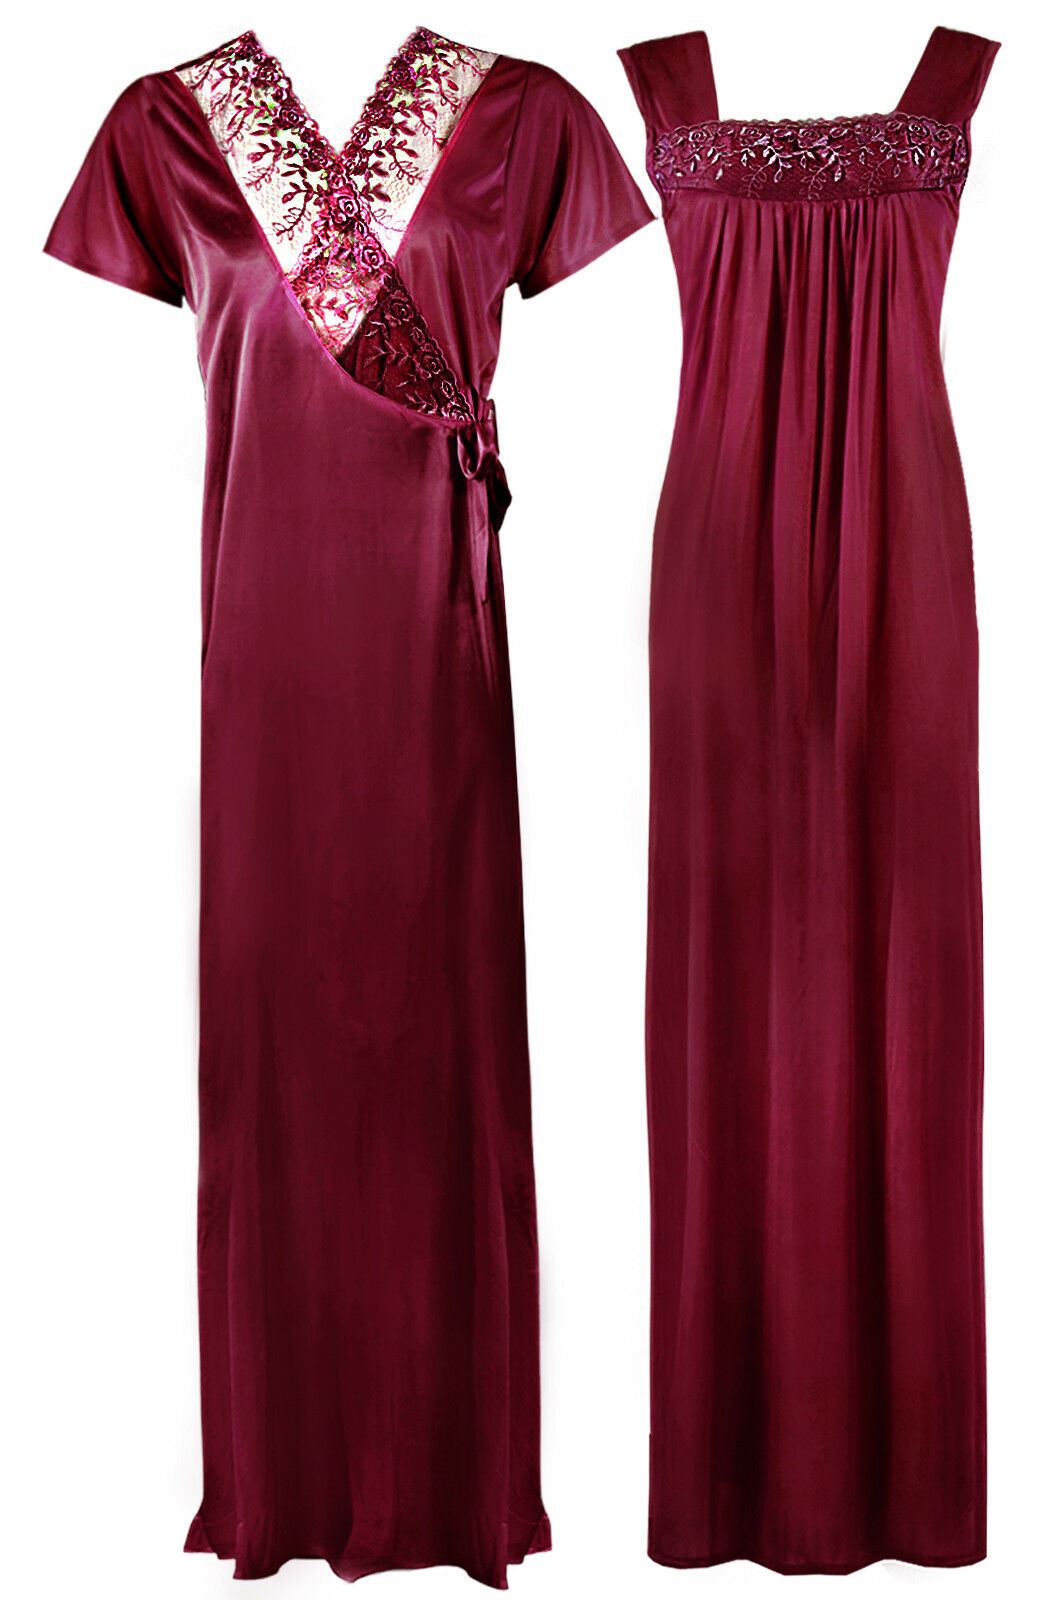 Deep Red / One Size WOMENS LONG SATIN CHEMISE NIGHTIE NIGHTDRESS LADIES DRESSING GOWN 2PC SET 8-16 The Orange Tags